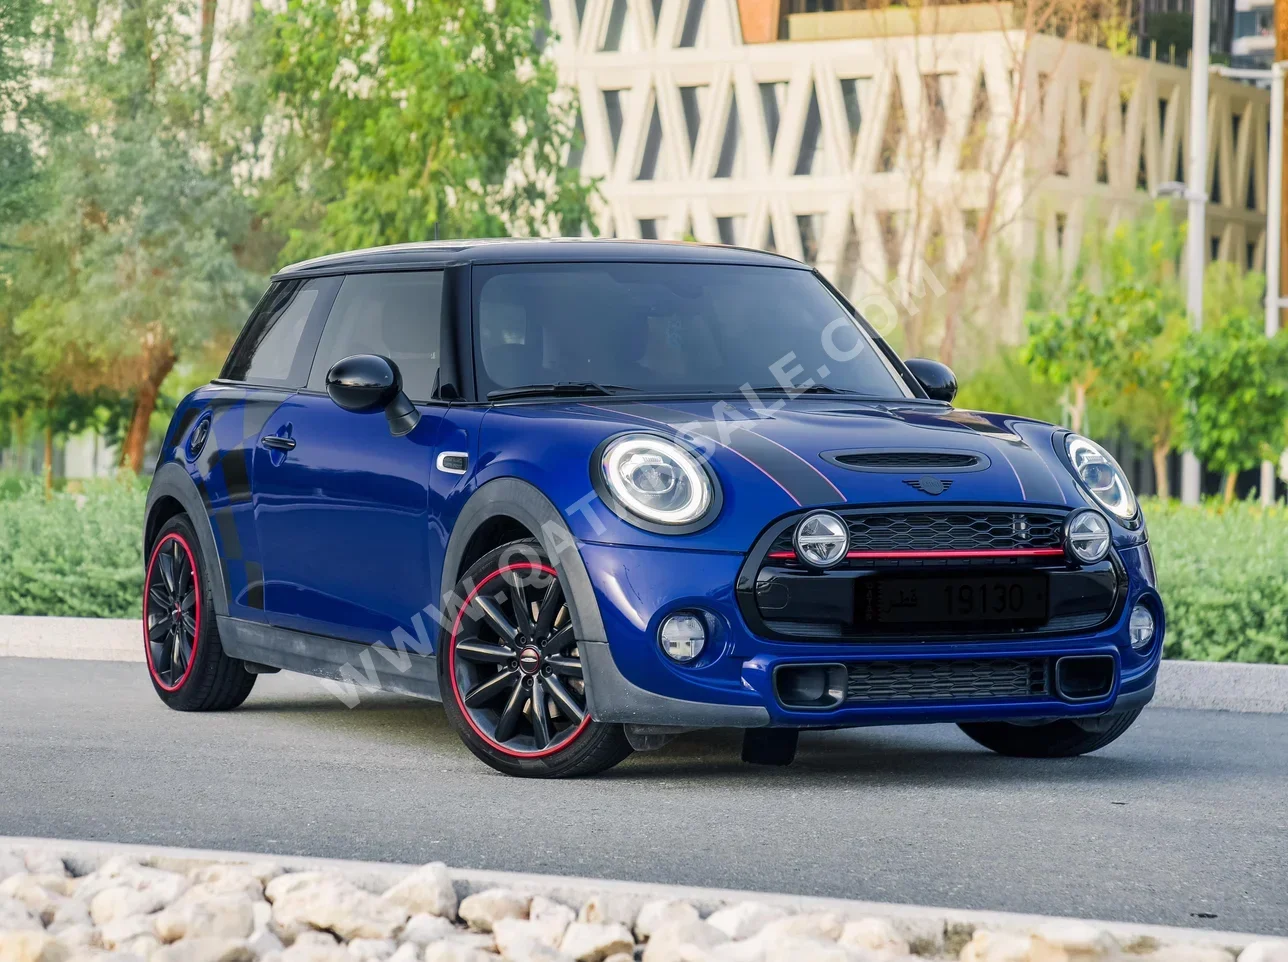 Mini  Cooper  S  2019  Automatic  50,000 Km  4 Cylinder  Front Wheel Drive (FWD)  Hatchback  Blue